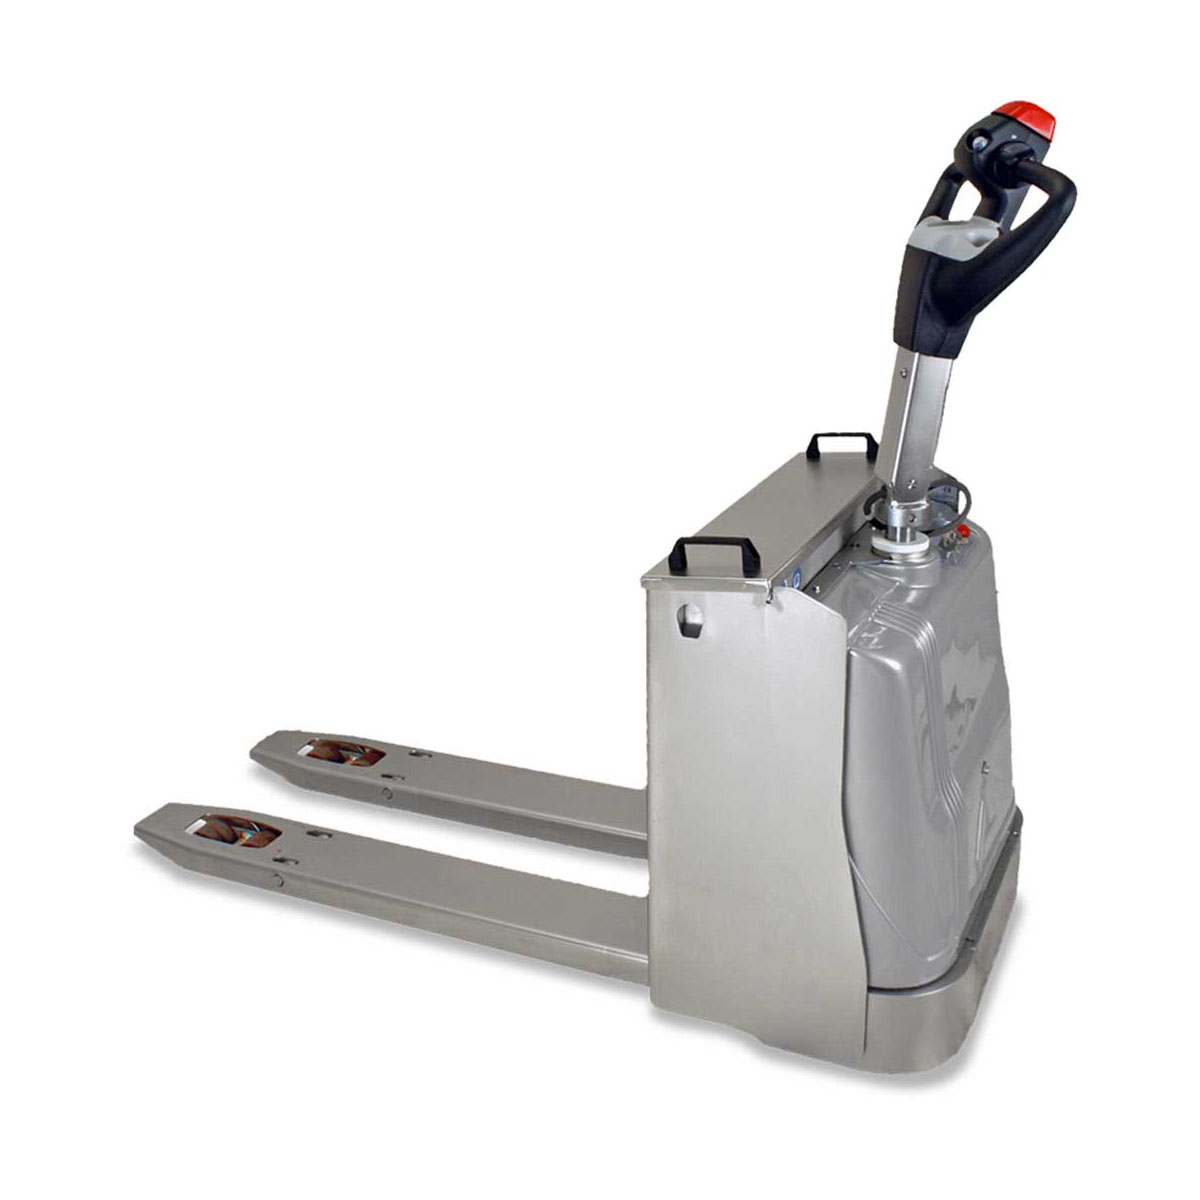 Buy Electric Pallet Trucks (Stainless Steel) in 2-Way Pallet Trucks from Armanni available at Astrolift NZ